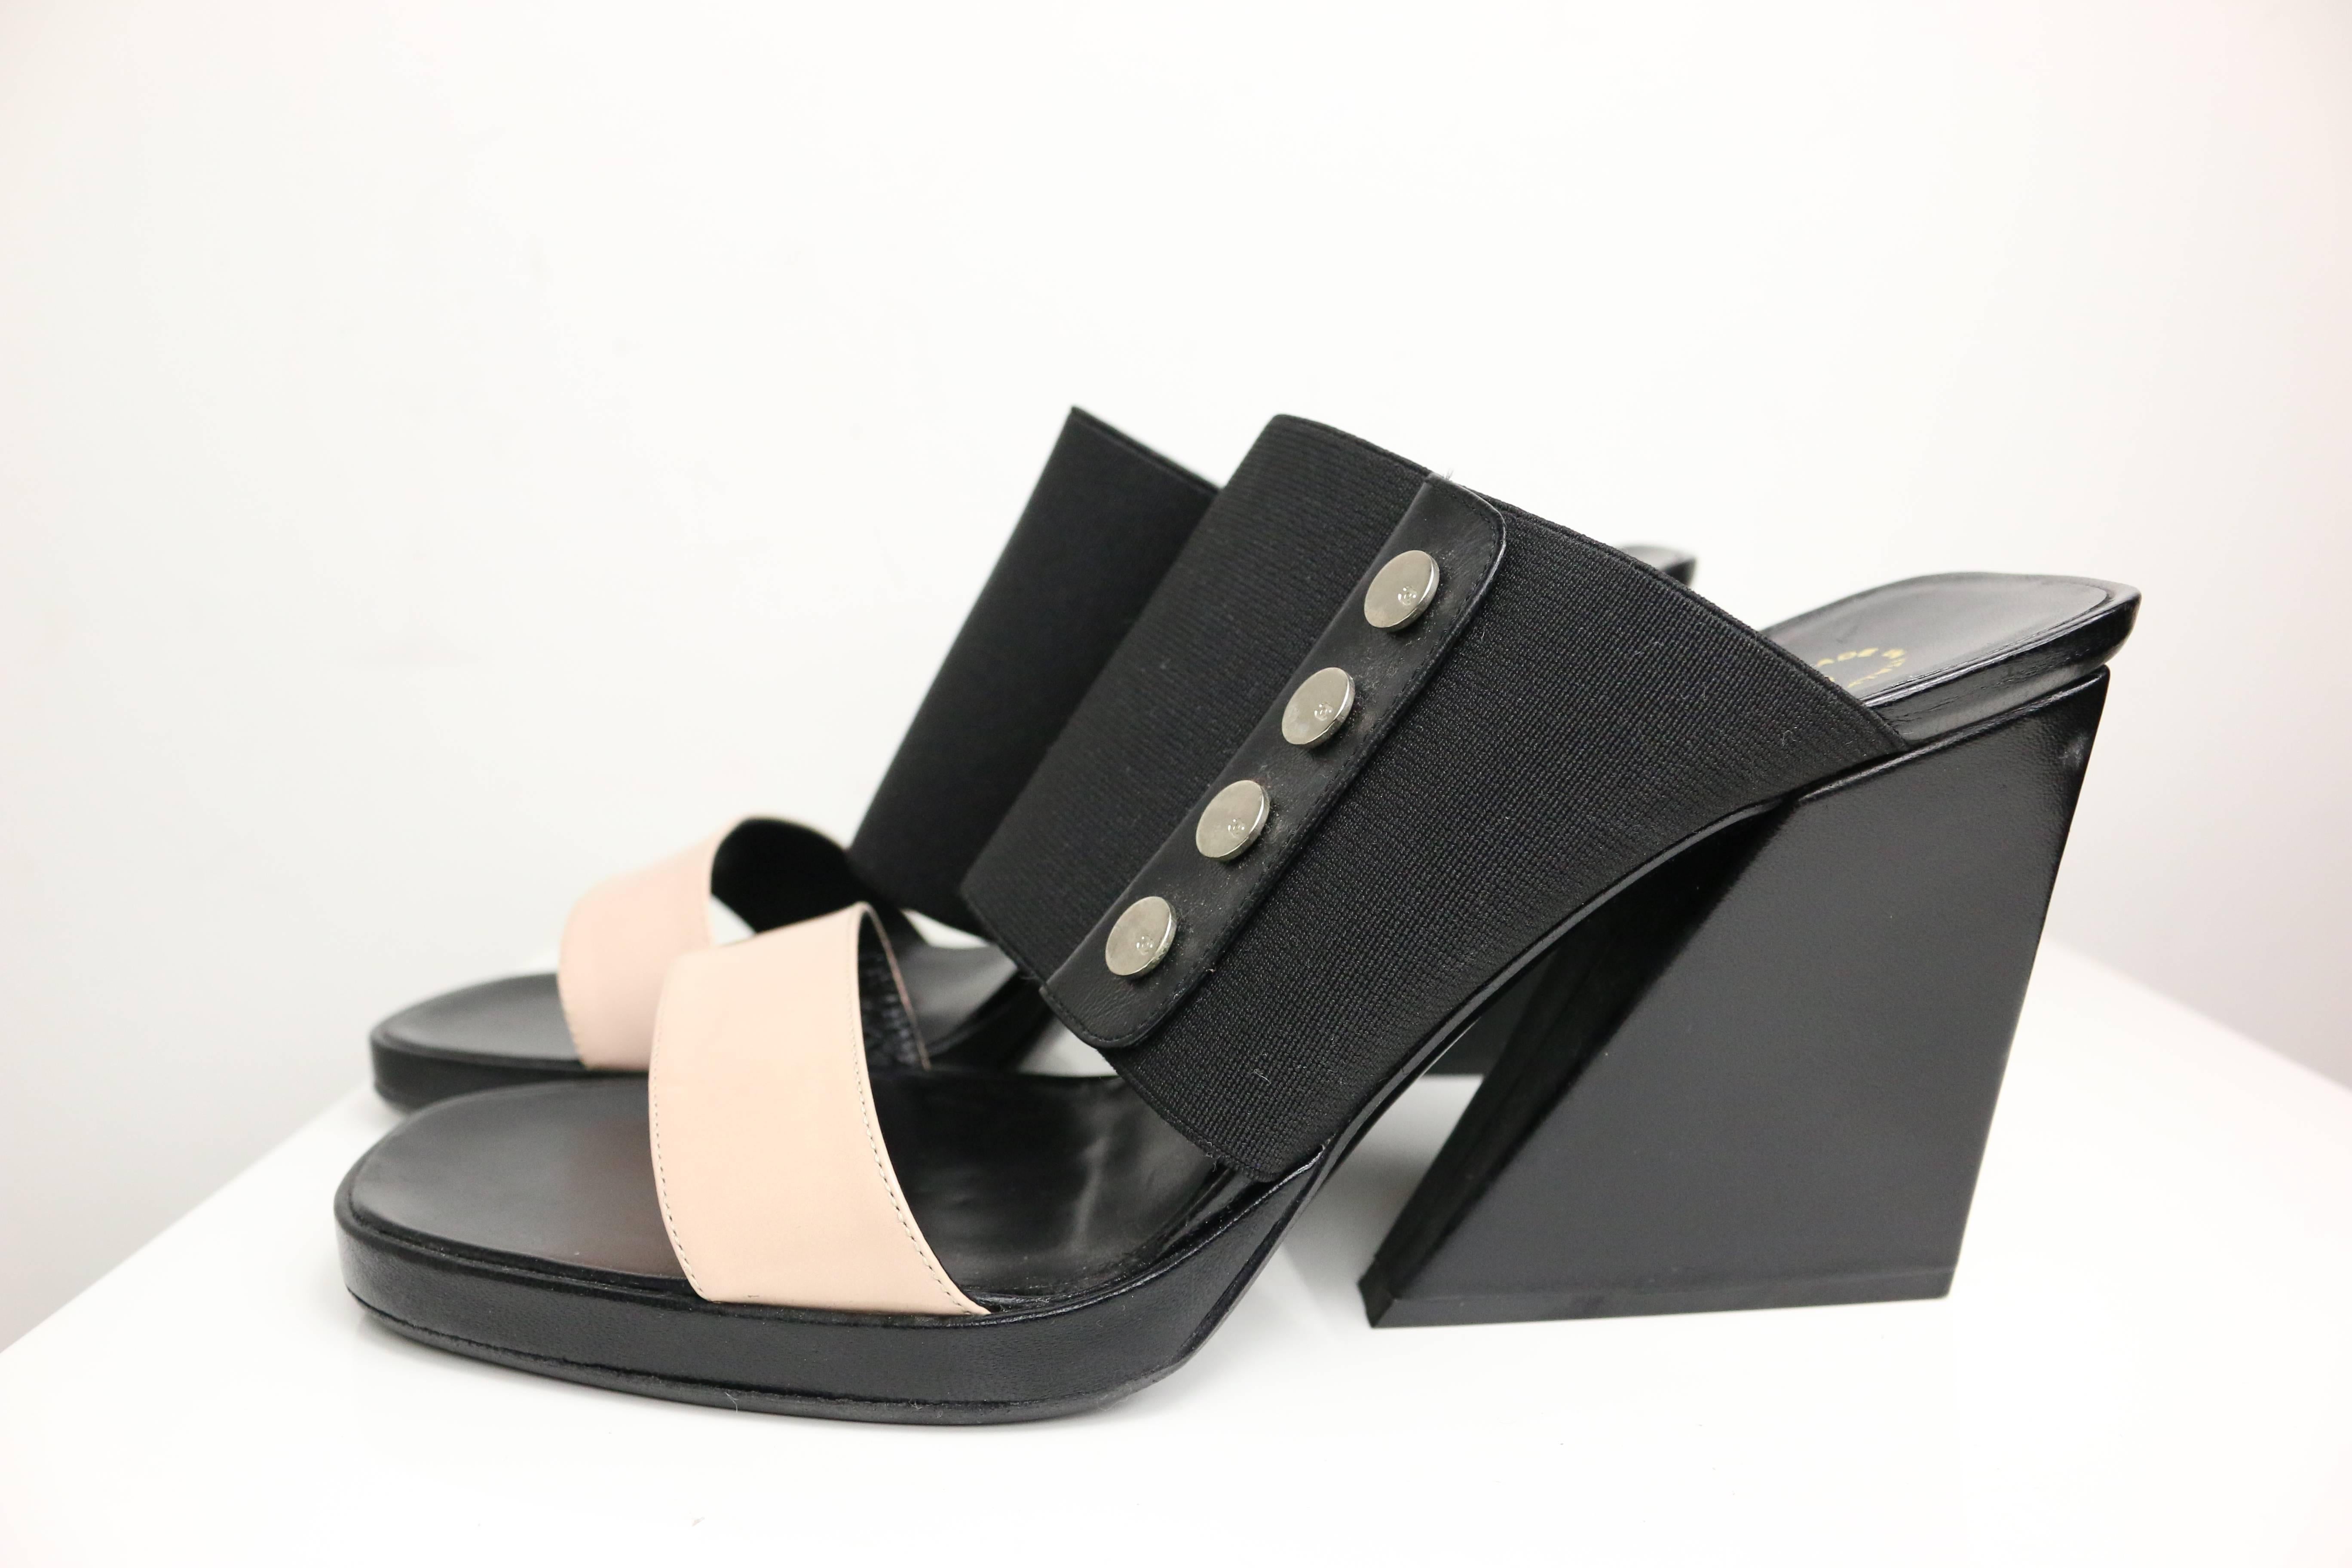 - Chanel bi tone light pink leather strap, black elastic band strap wedge shoes. 

- Featuring four "CC" logo panel metal studs on each wedge. 

- Made in Italy. 

- SIze 38. 

- Height: 4in, Length: 8in ( measurements are approximate).